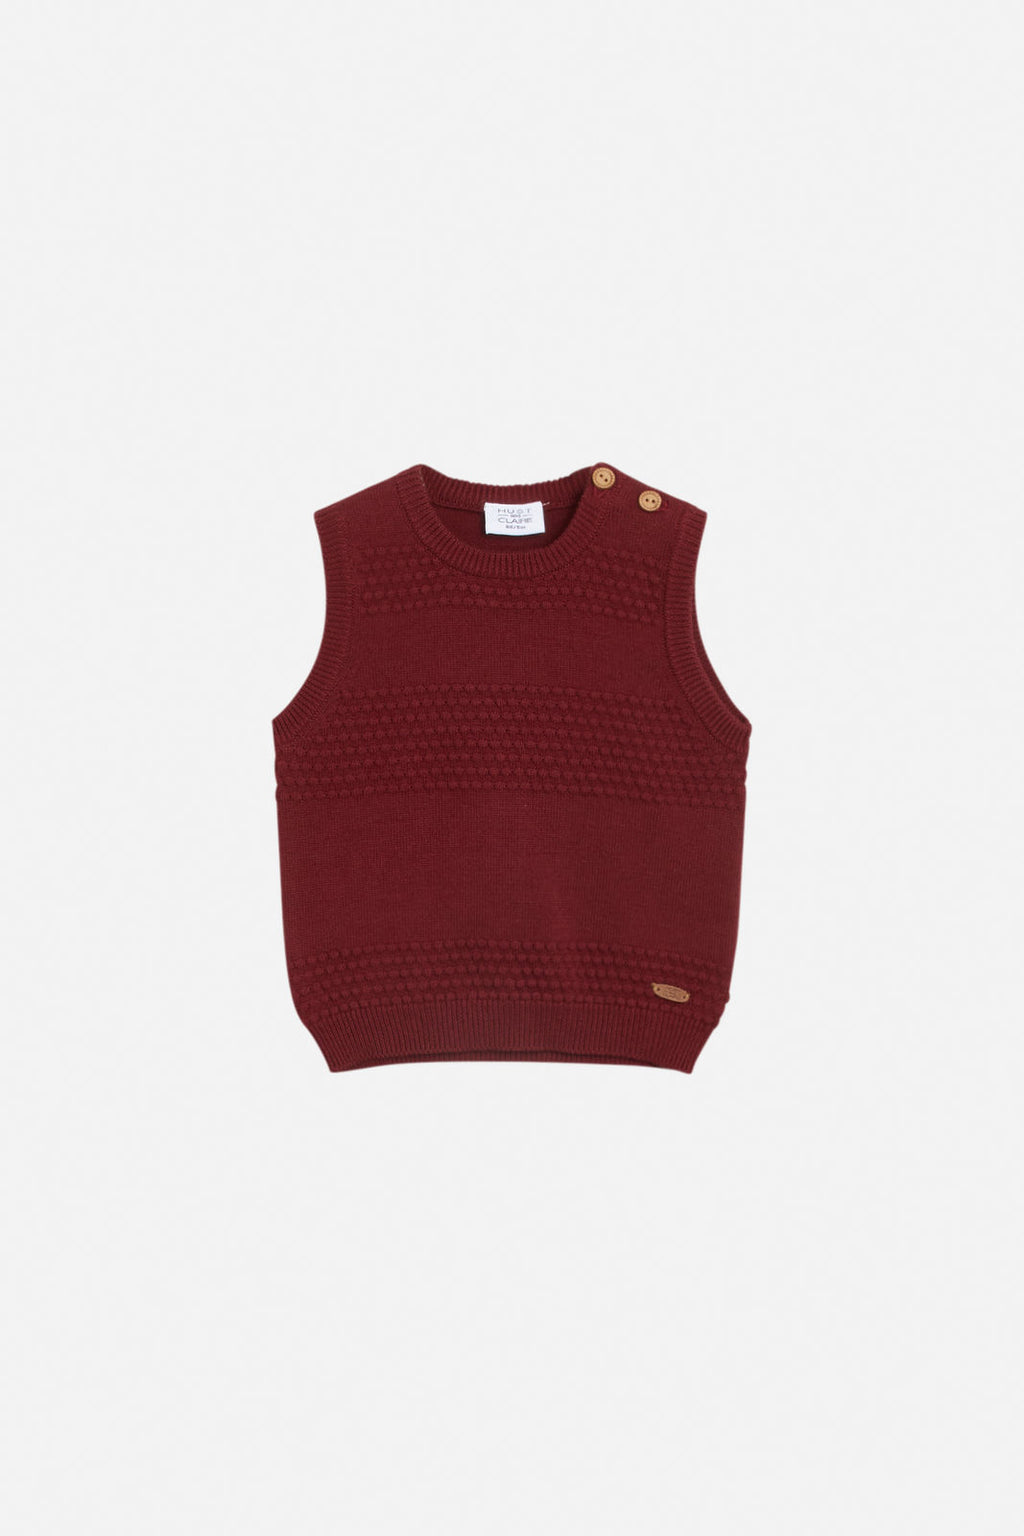 Hust and Claire Perry Vest Ruby Wine